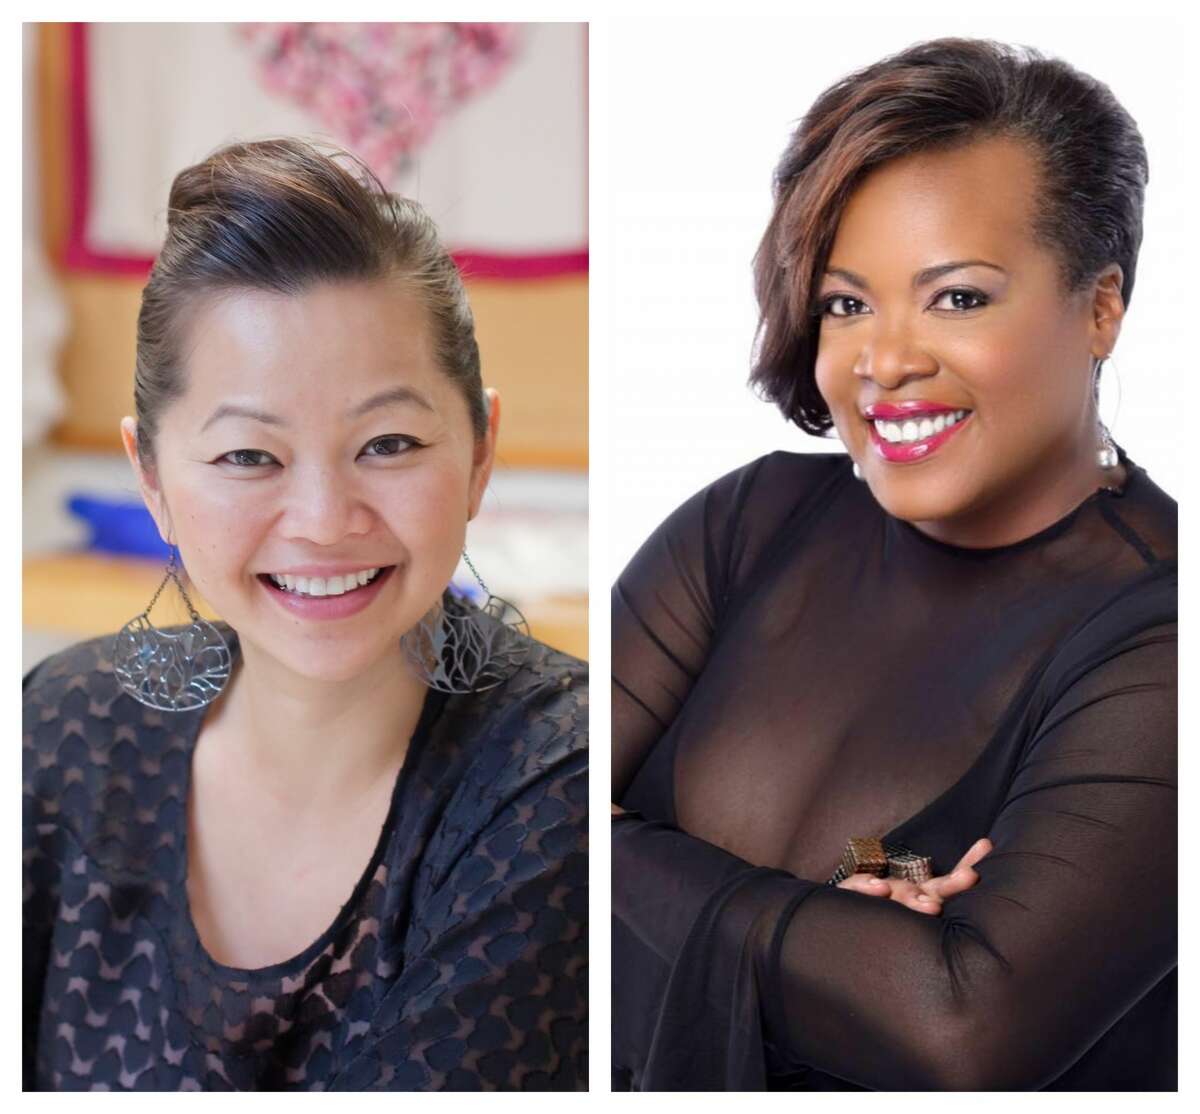 FASHION: Chloe Dao is owner of Chloe Dao Boutique in Rice Village and a Project Runway Winner. Jackie Adams has owned Melodrama boutique on Almeda for nearly 20 years.